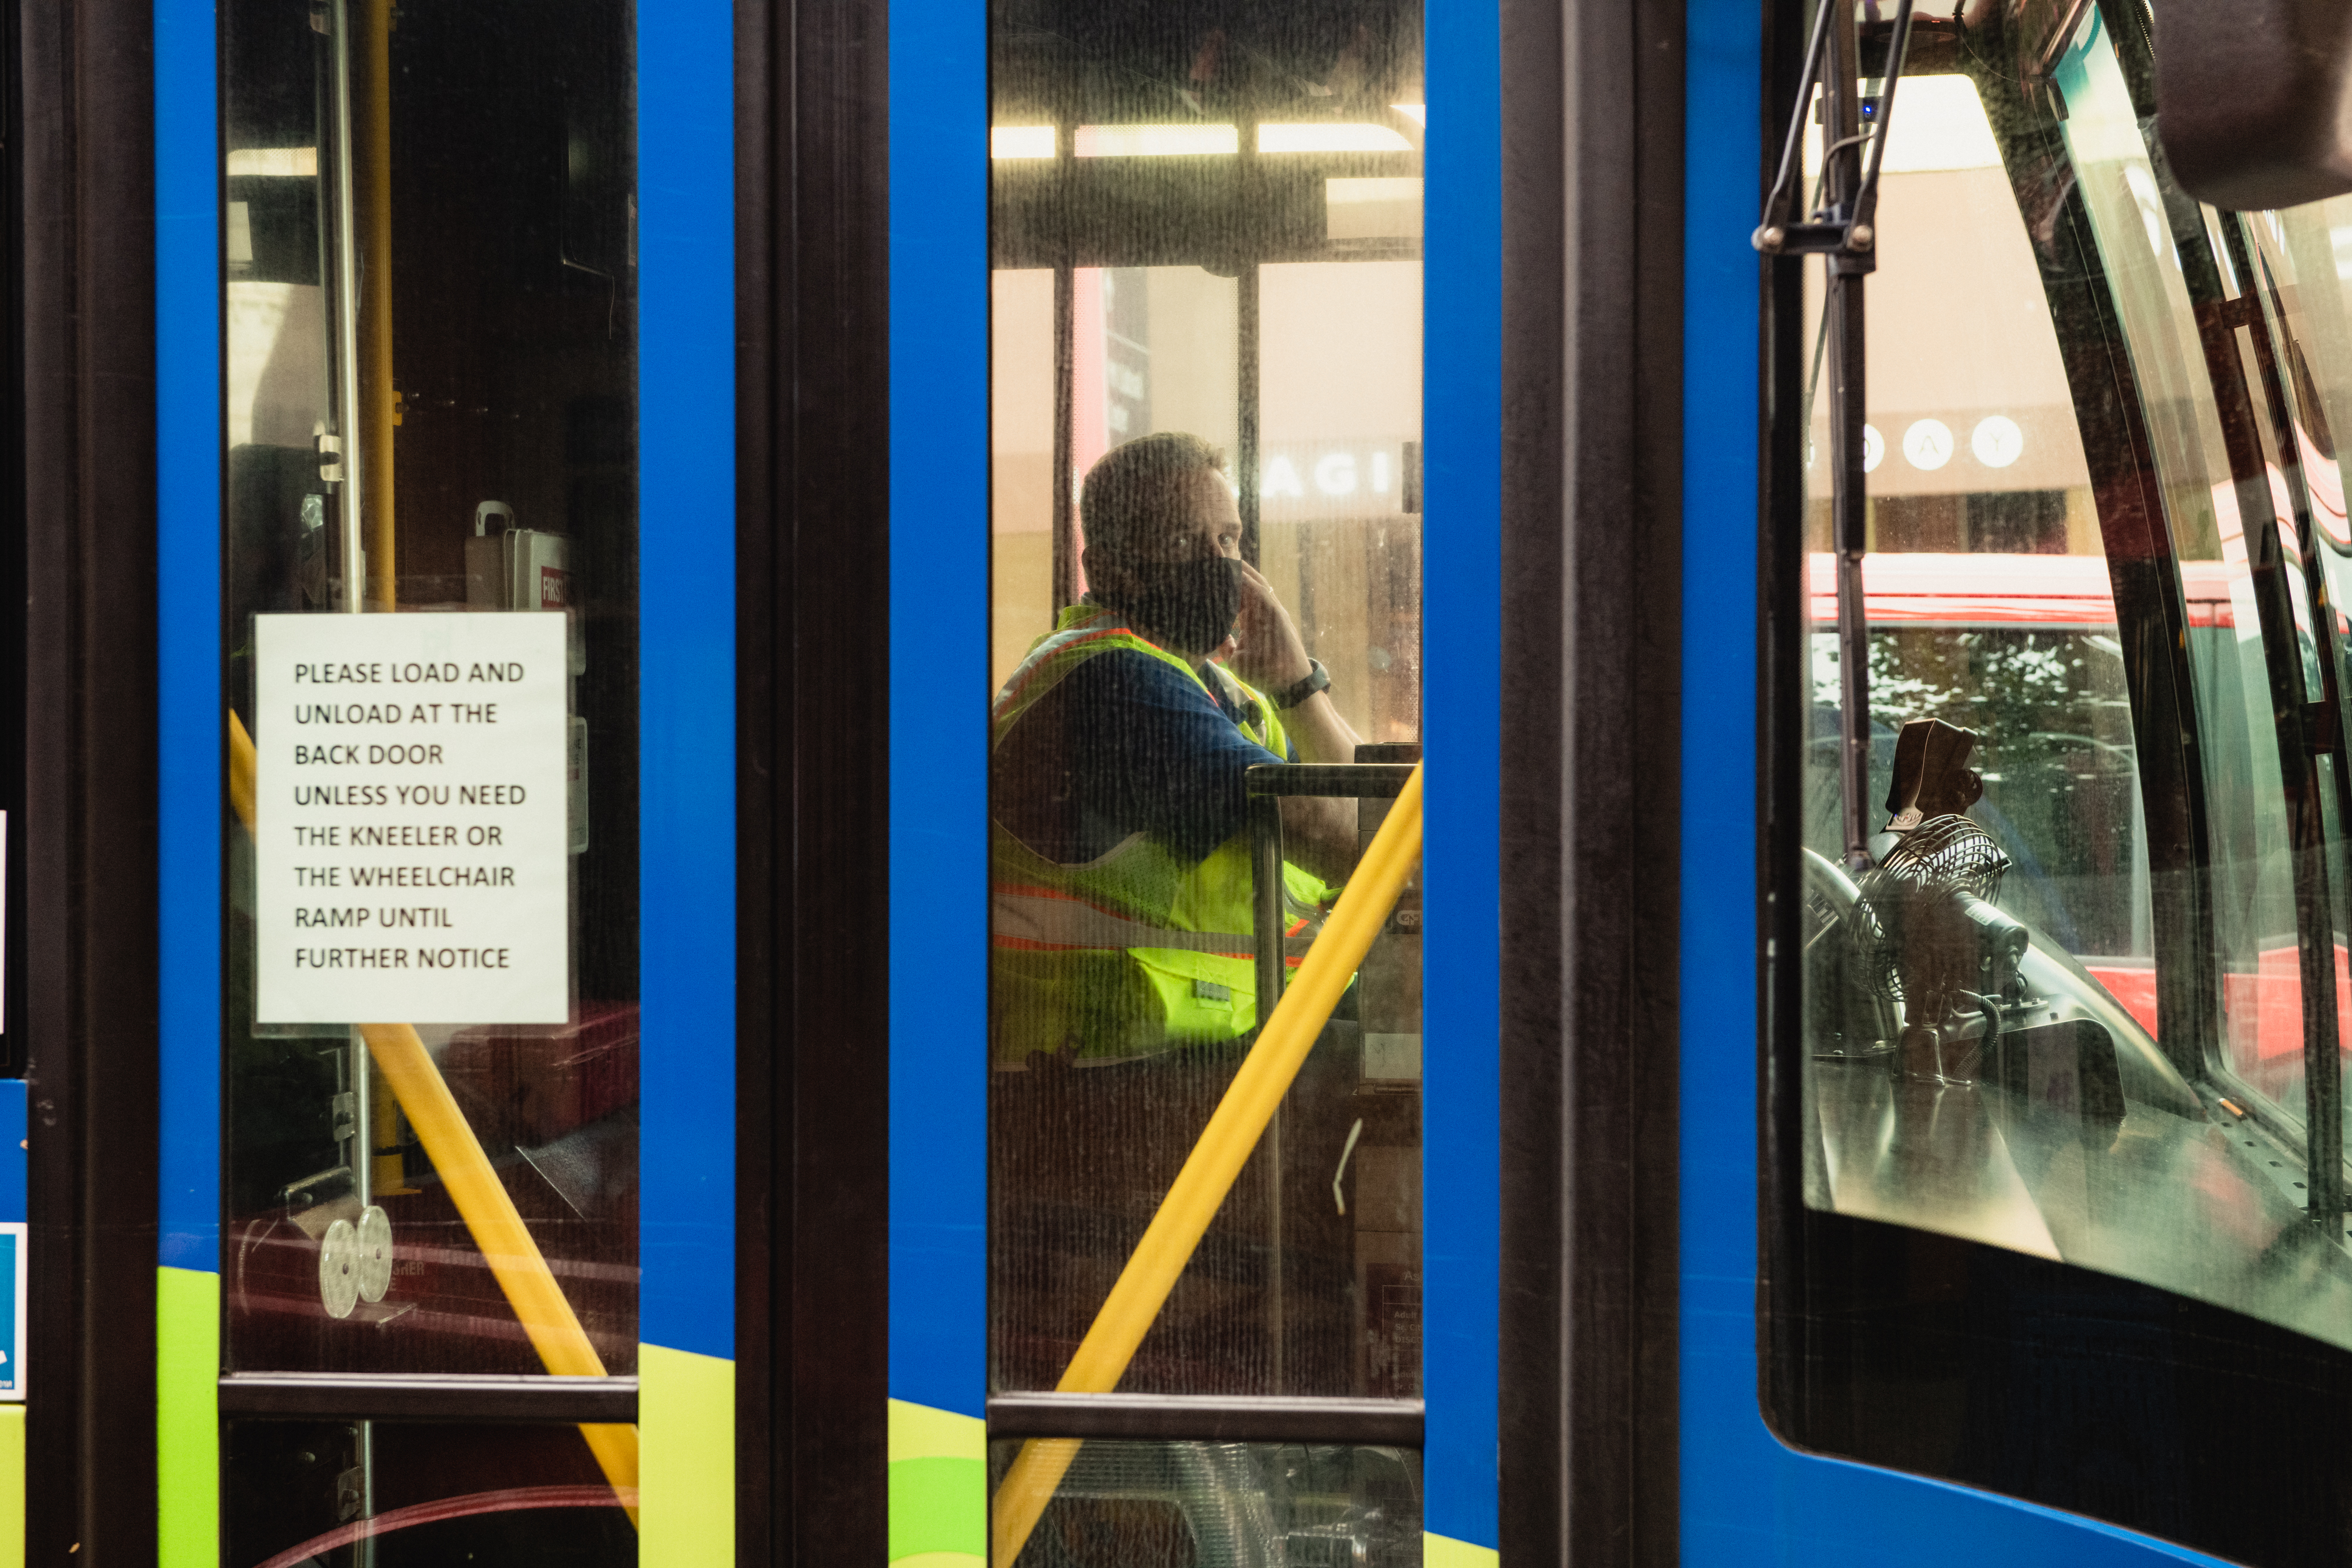 A driver wears a protective mask while riding a bus in downtown Asheville, North Carolina, U.S., on Wednesday, July 15, 2020. (George Etheredge—Bloomberg/Getty Images)